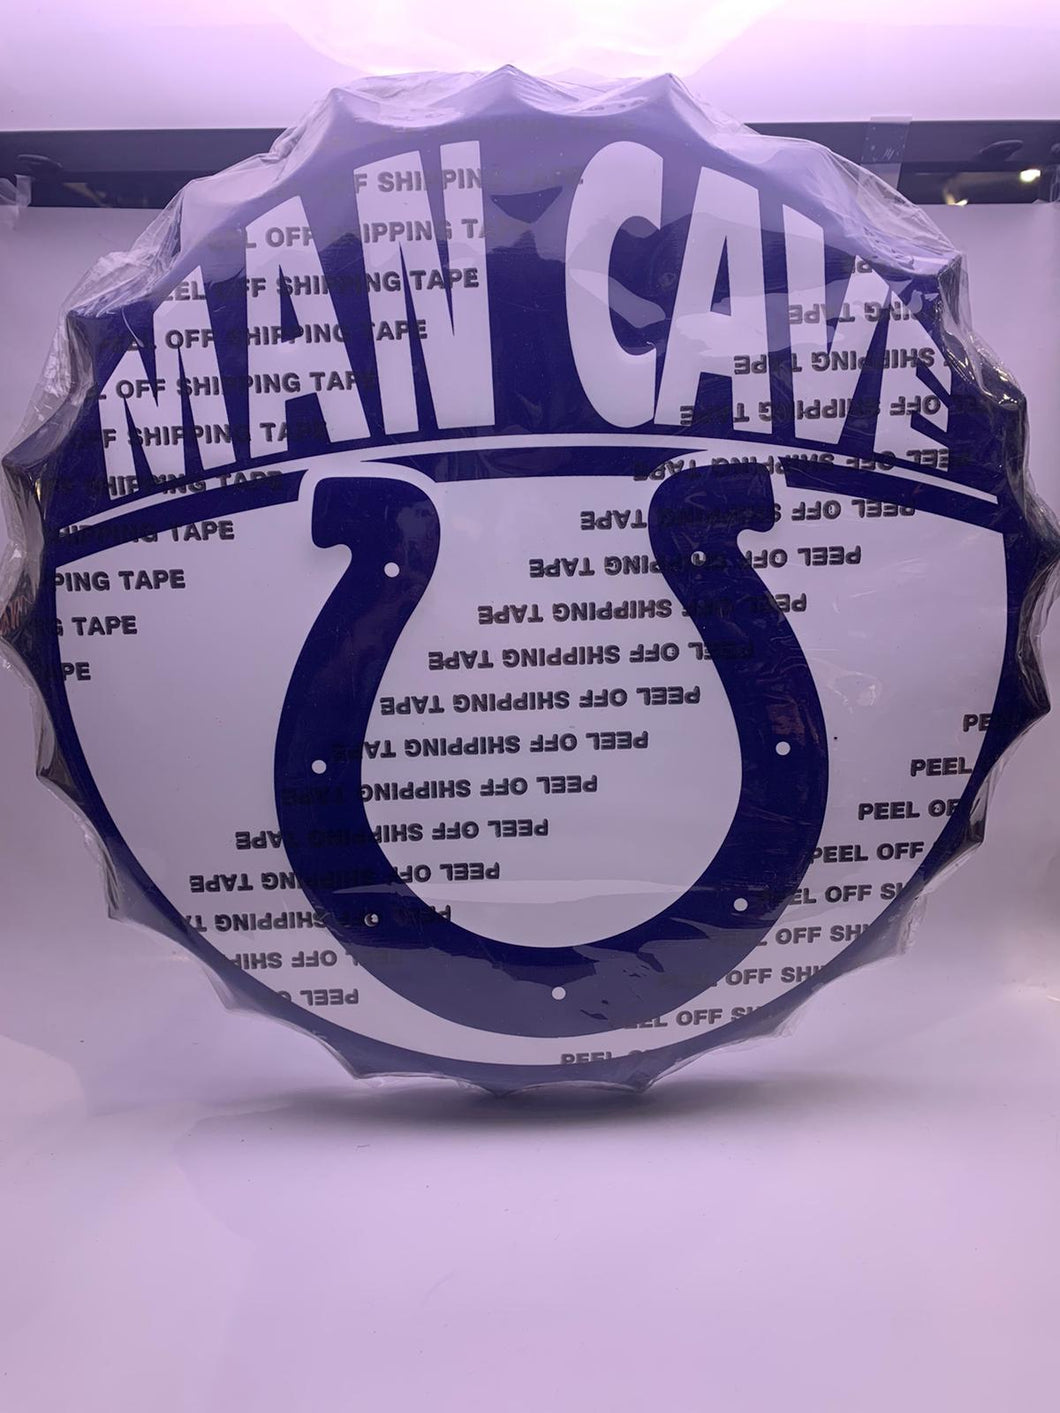 Indianapolis Colts Bottle Cap Wall Sign